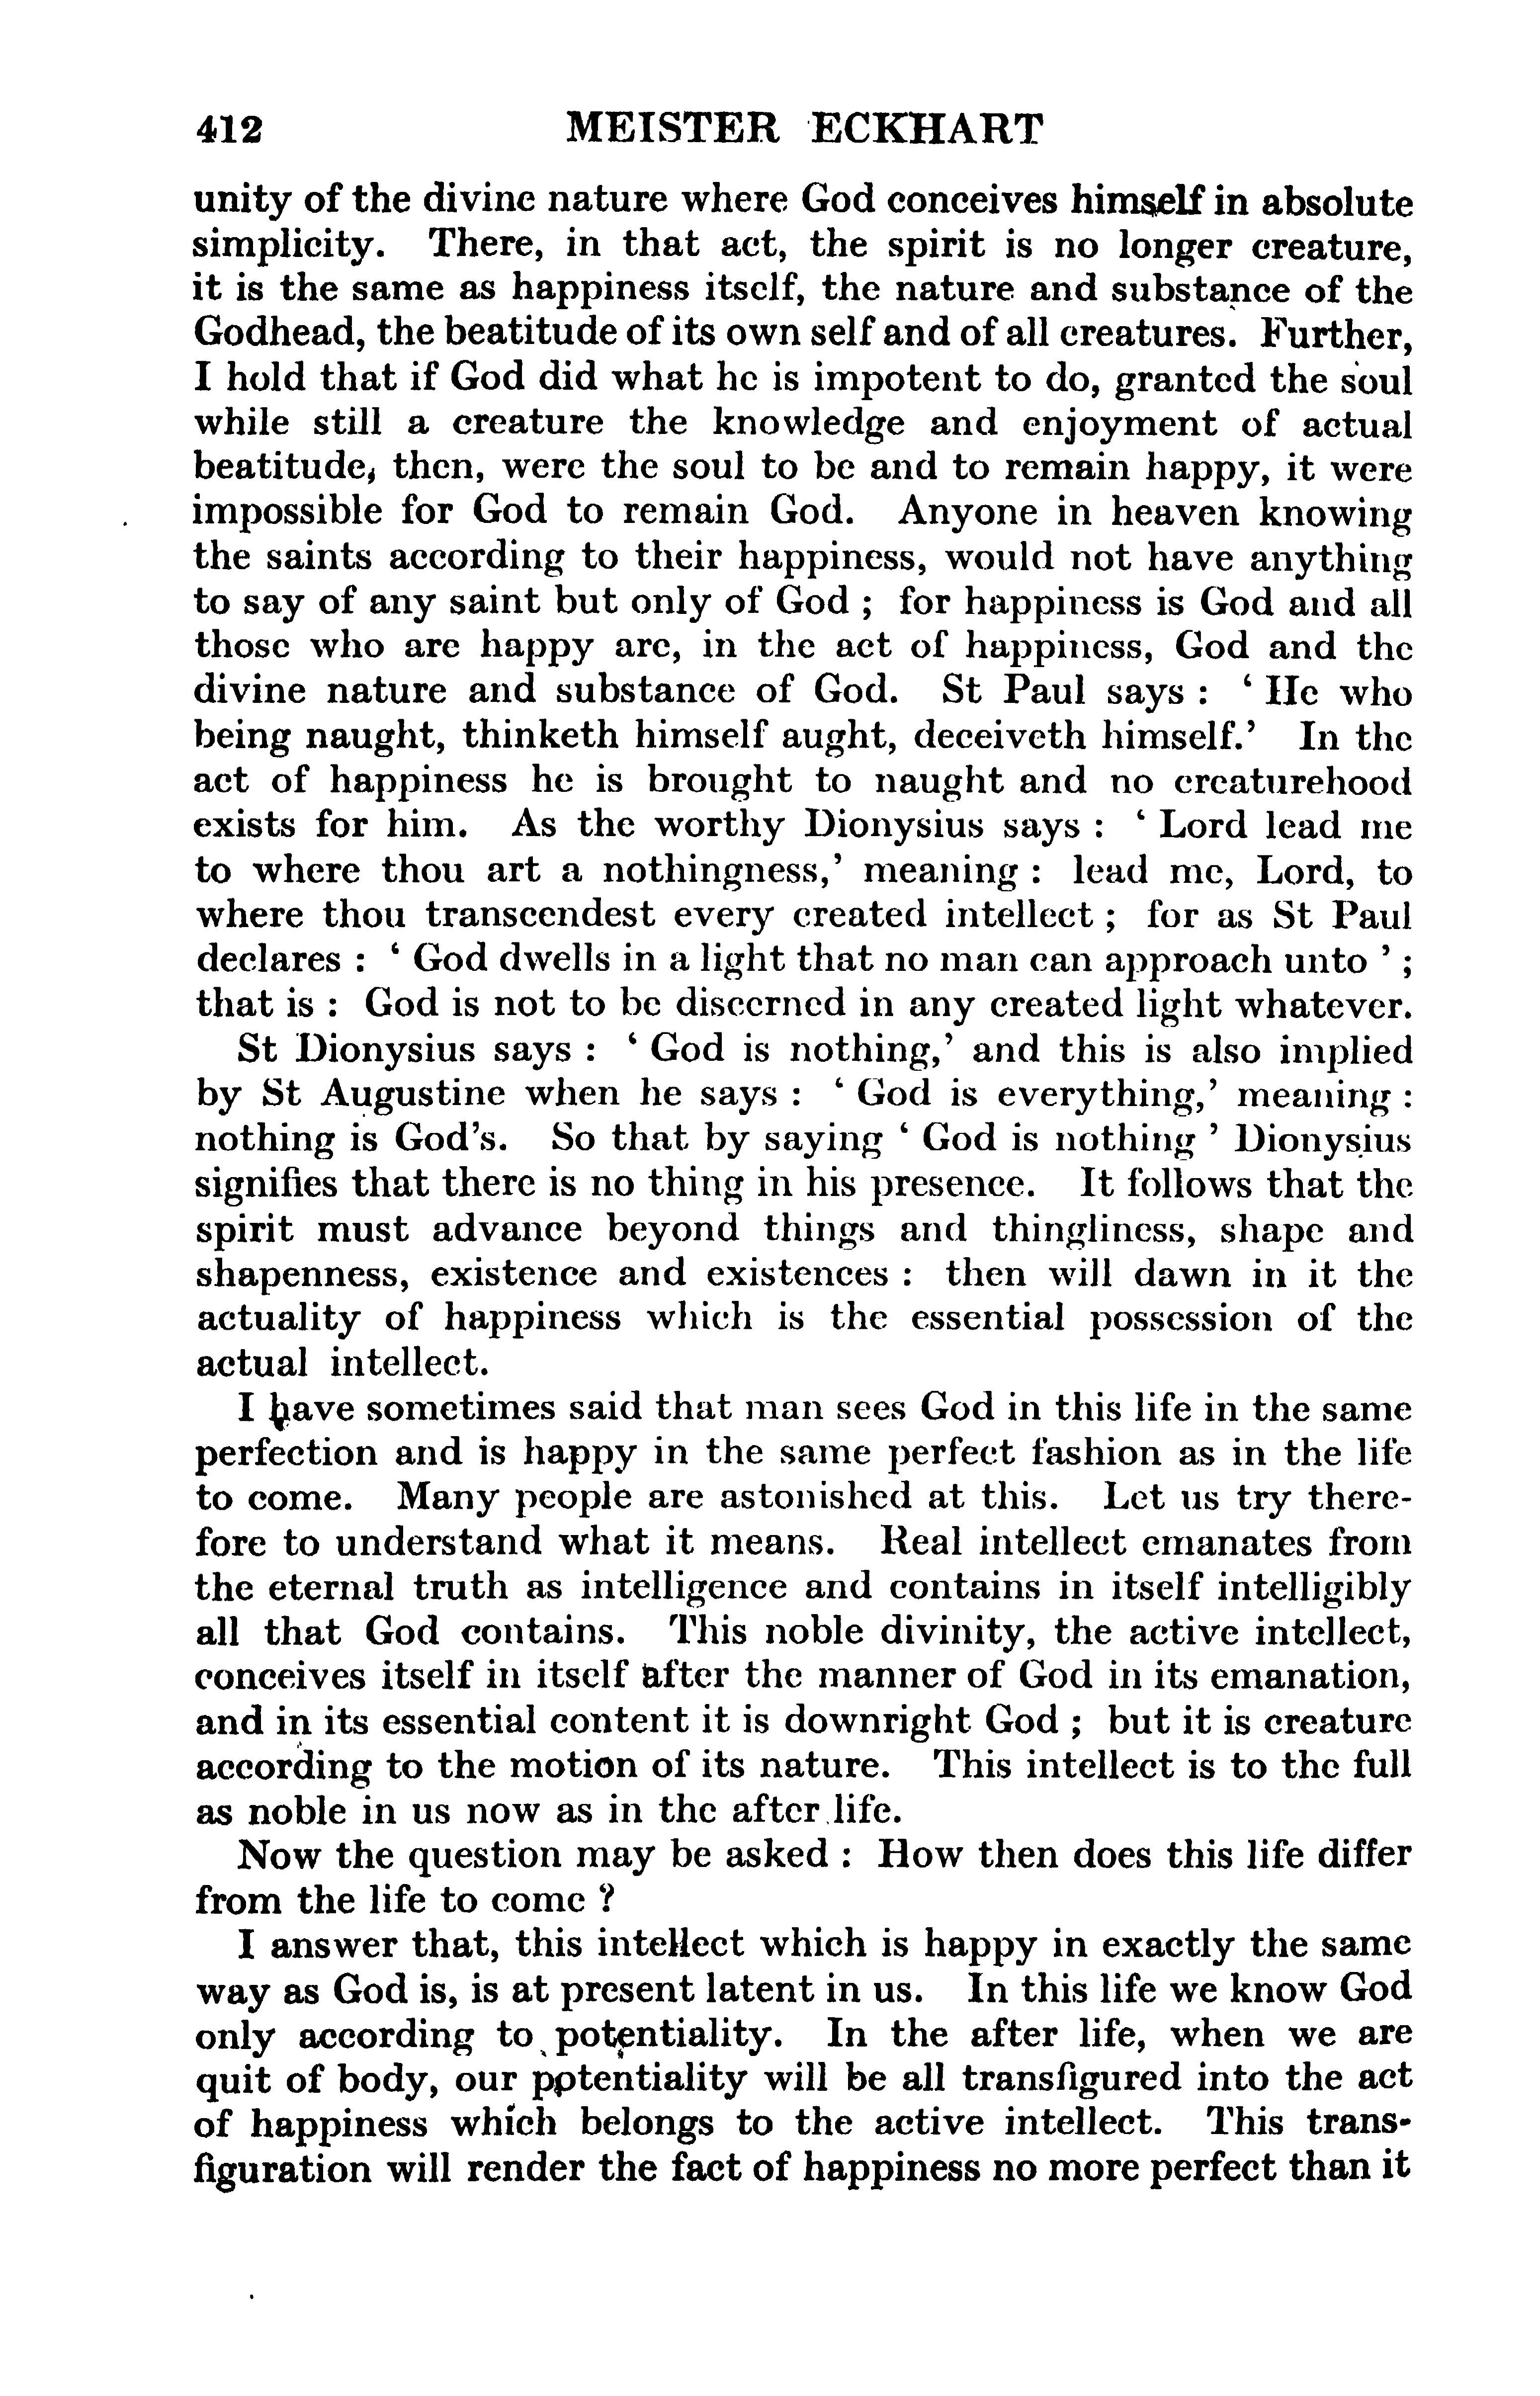 Image of page 0436